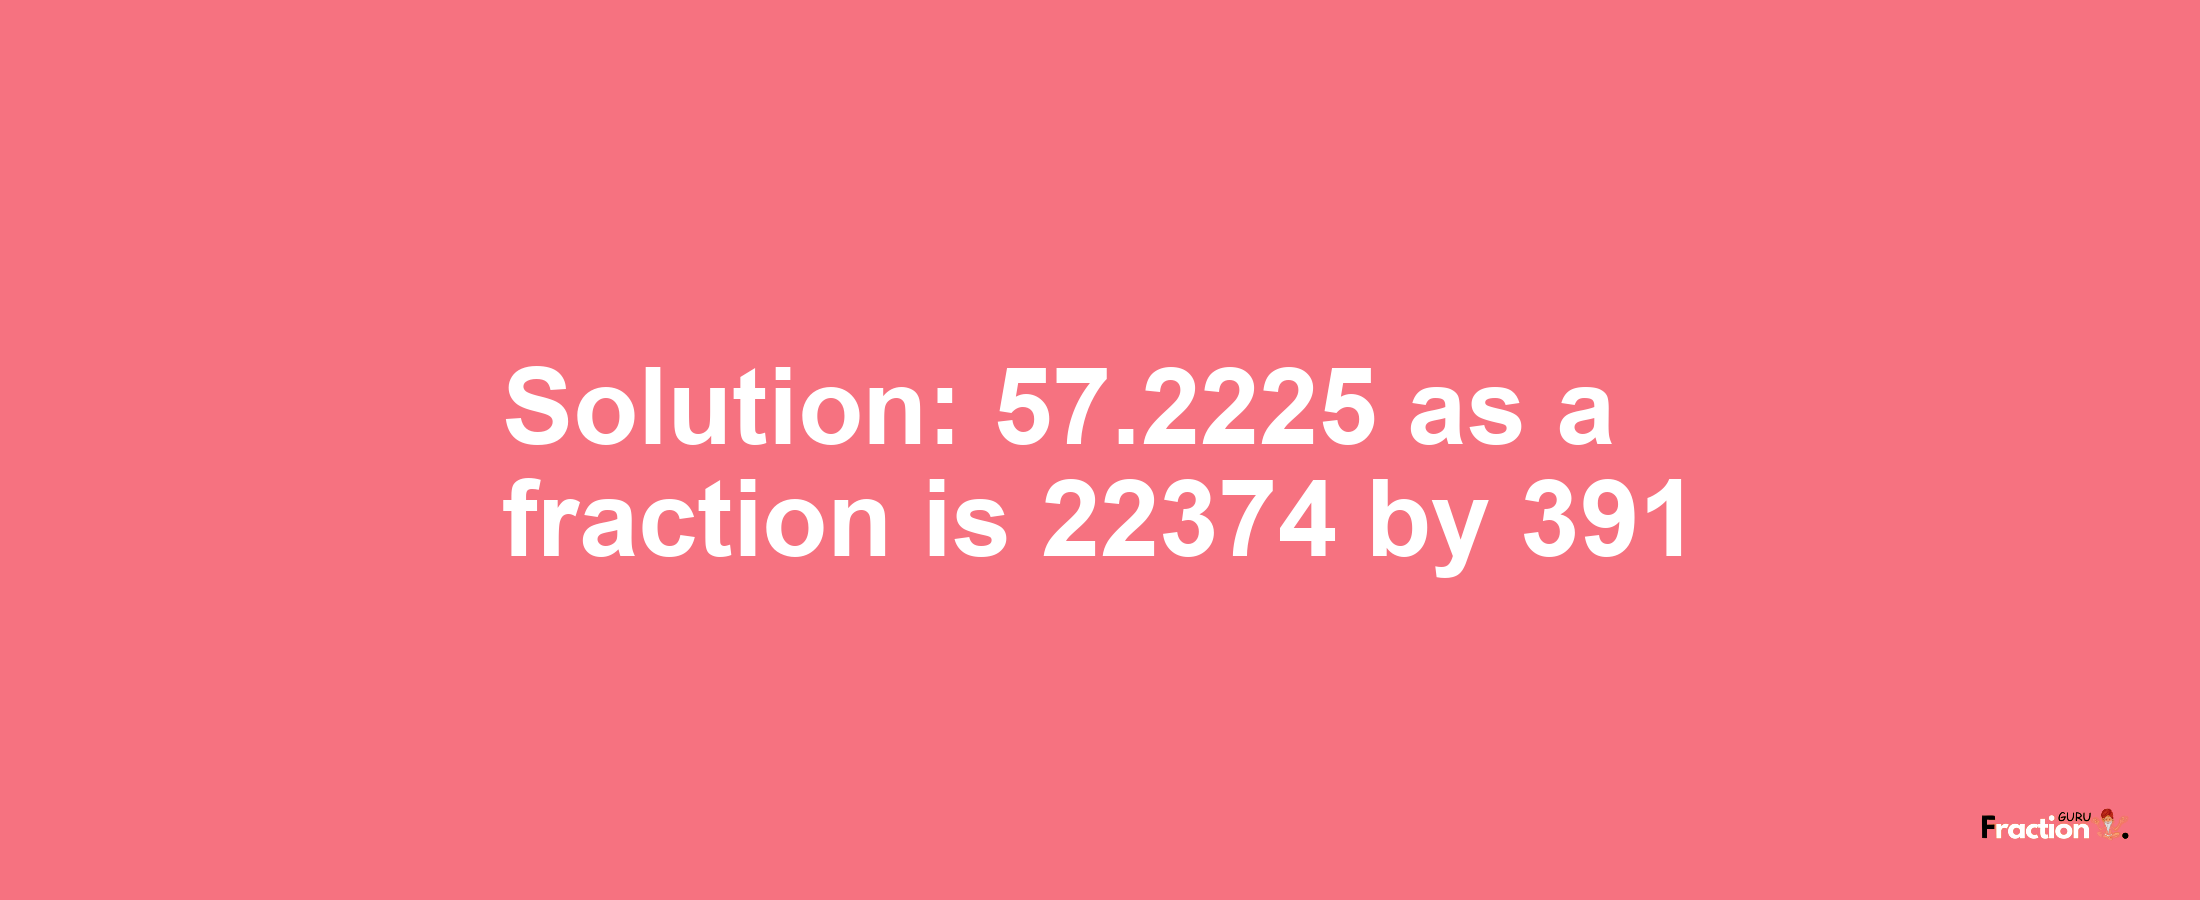 Solution:57.2225 as a fraction is 22374/391